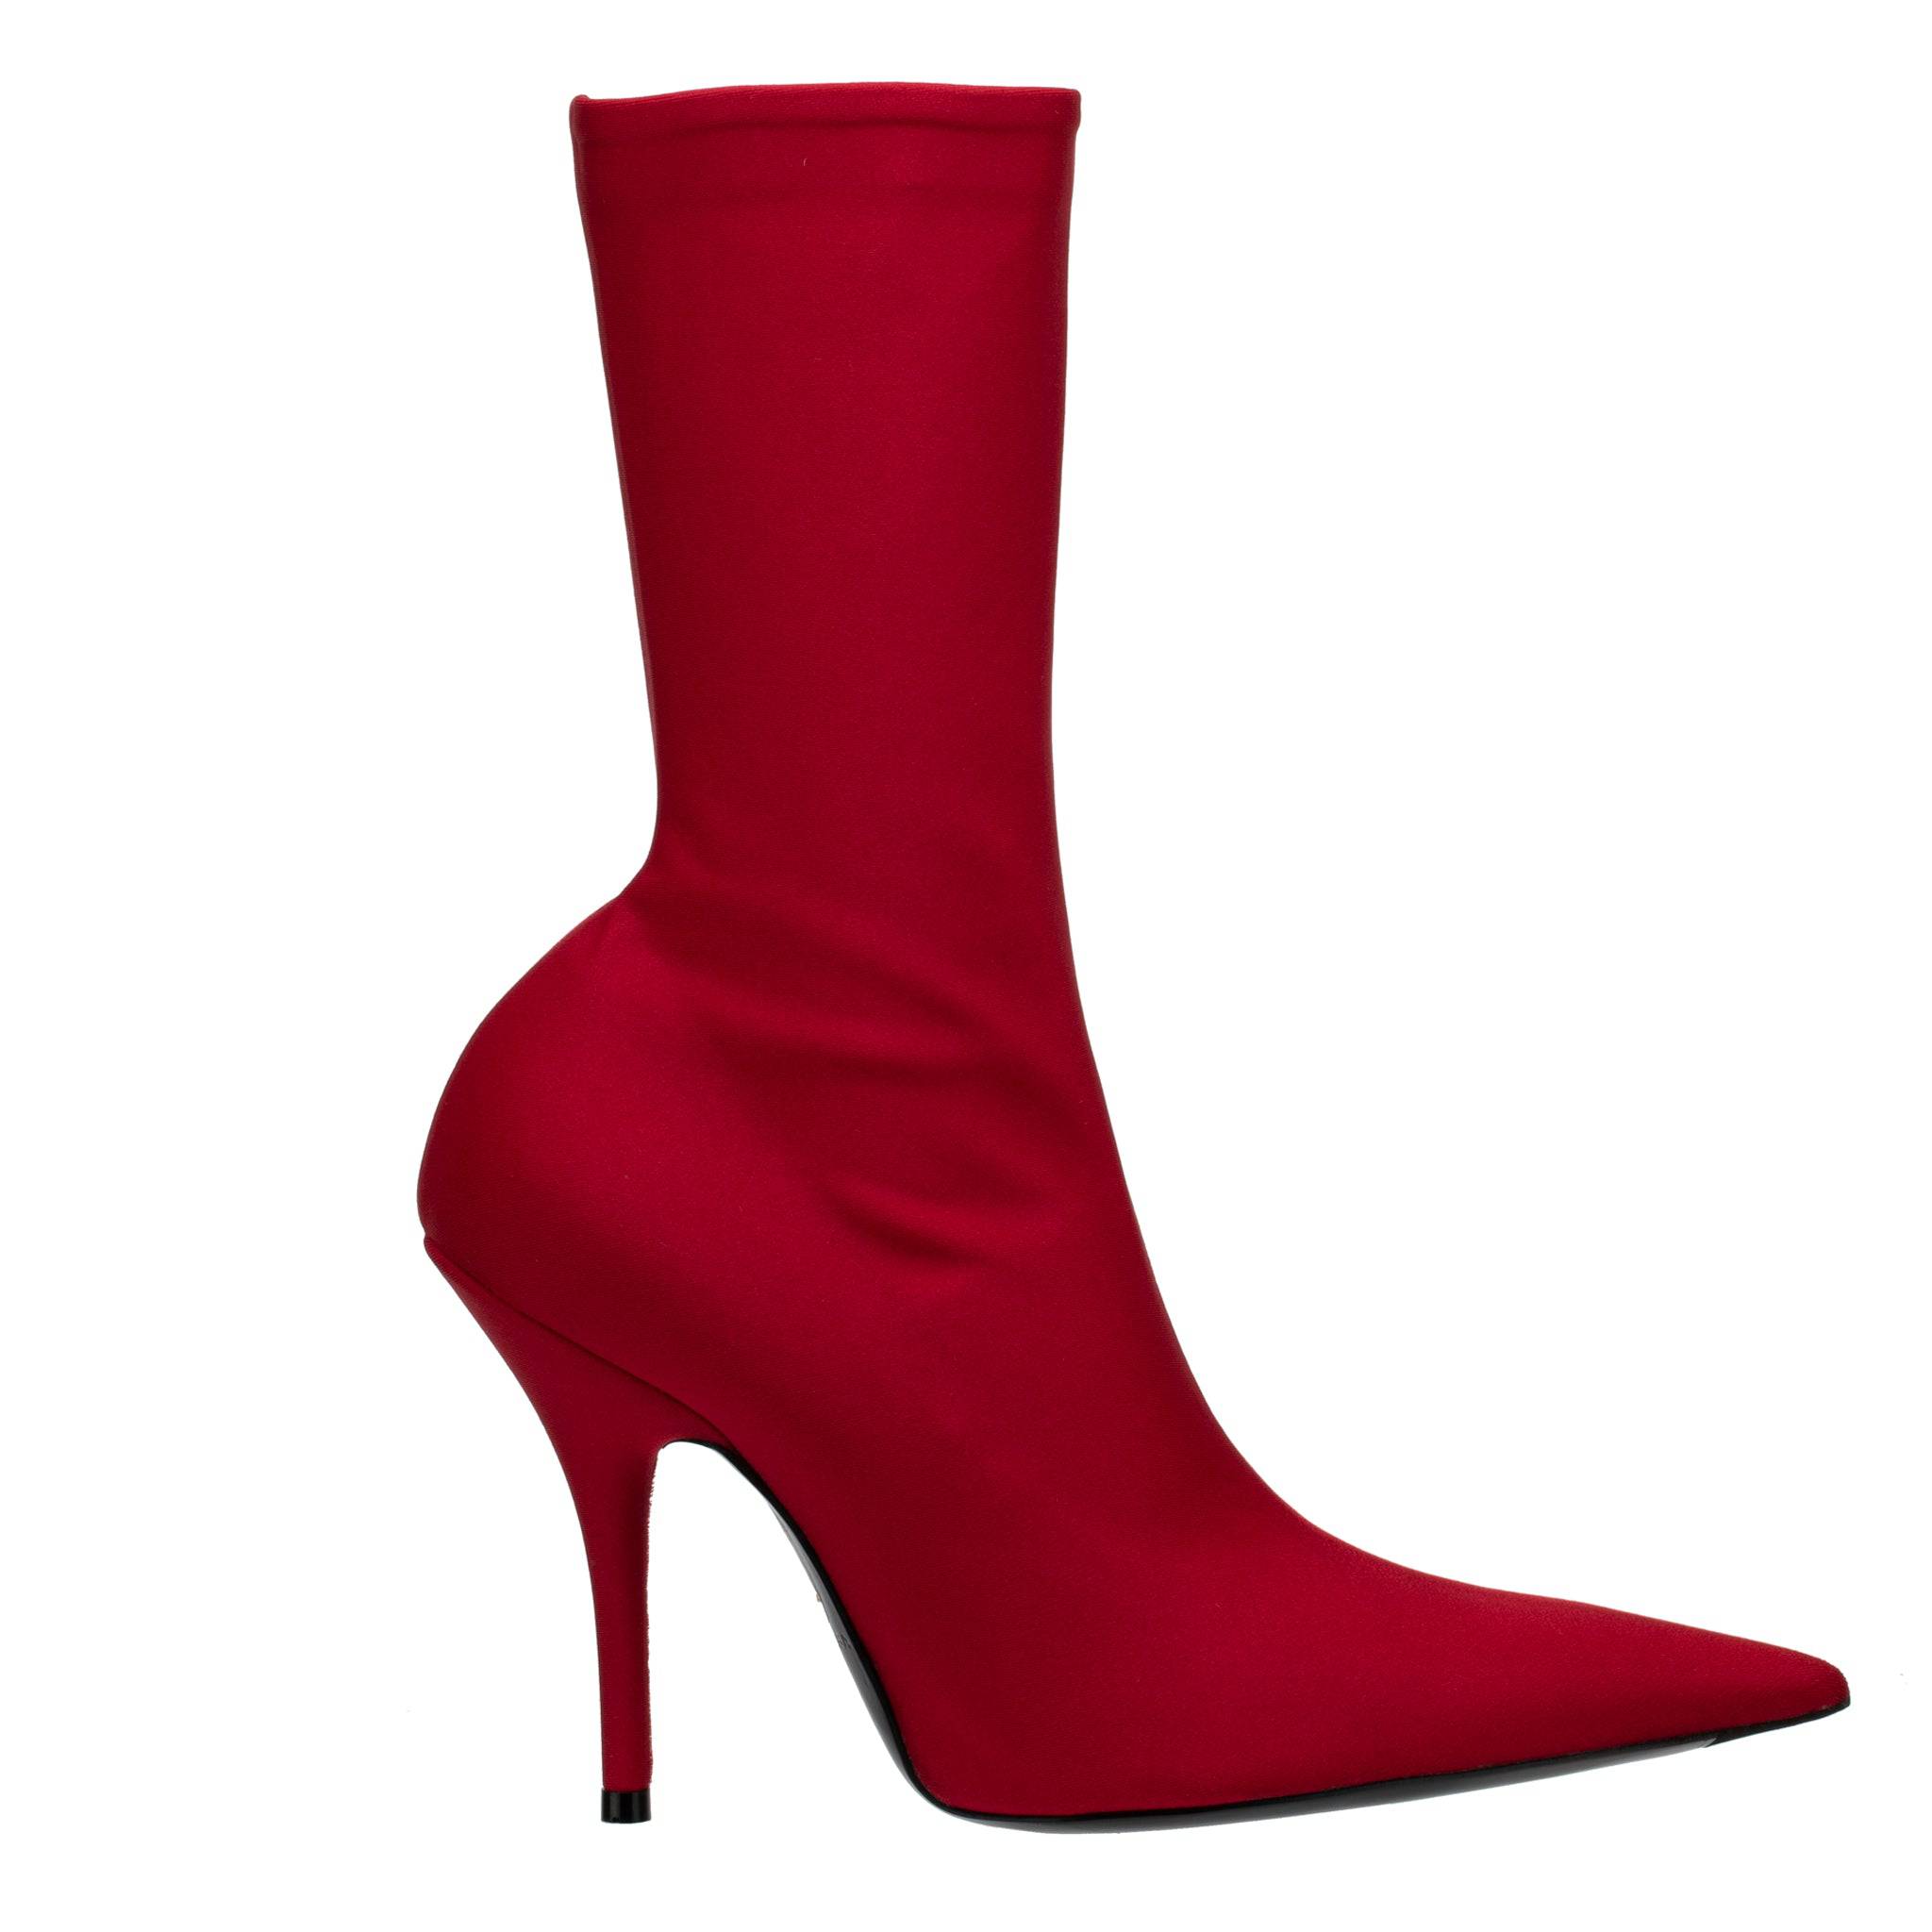 BALENCIAGA STRETCH KNIT KNIFE BOOT RED - On Repeat